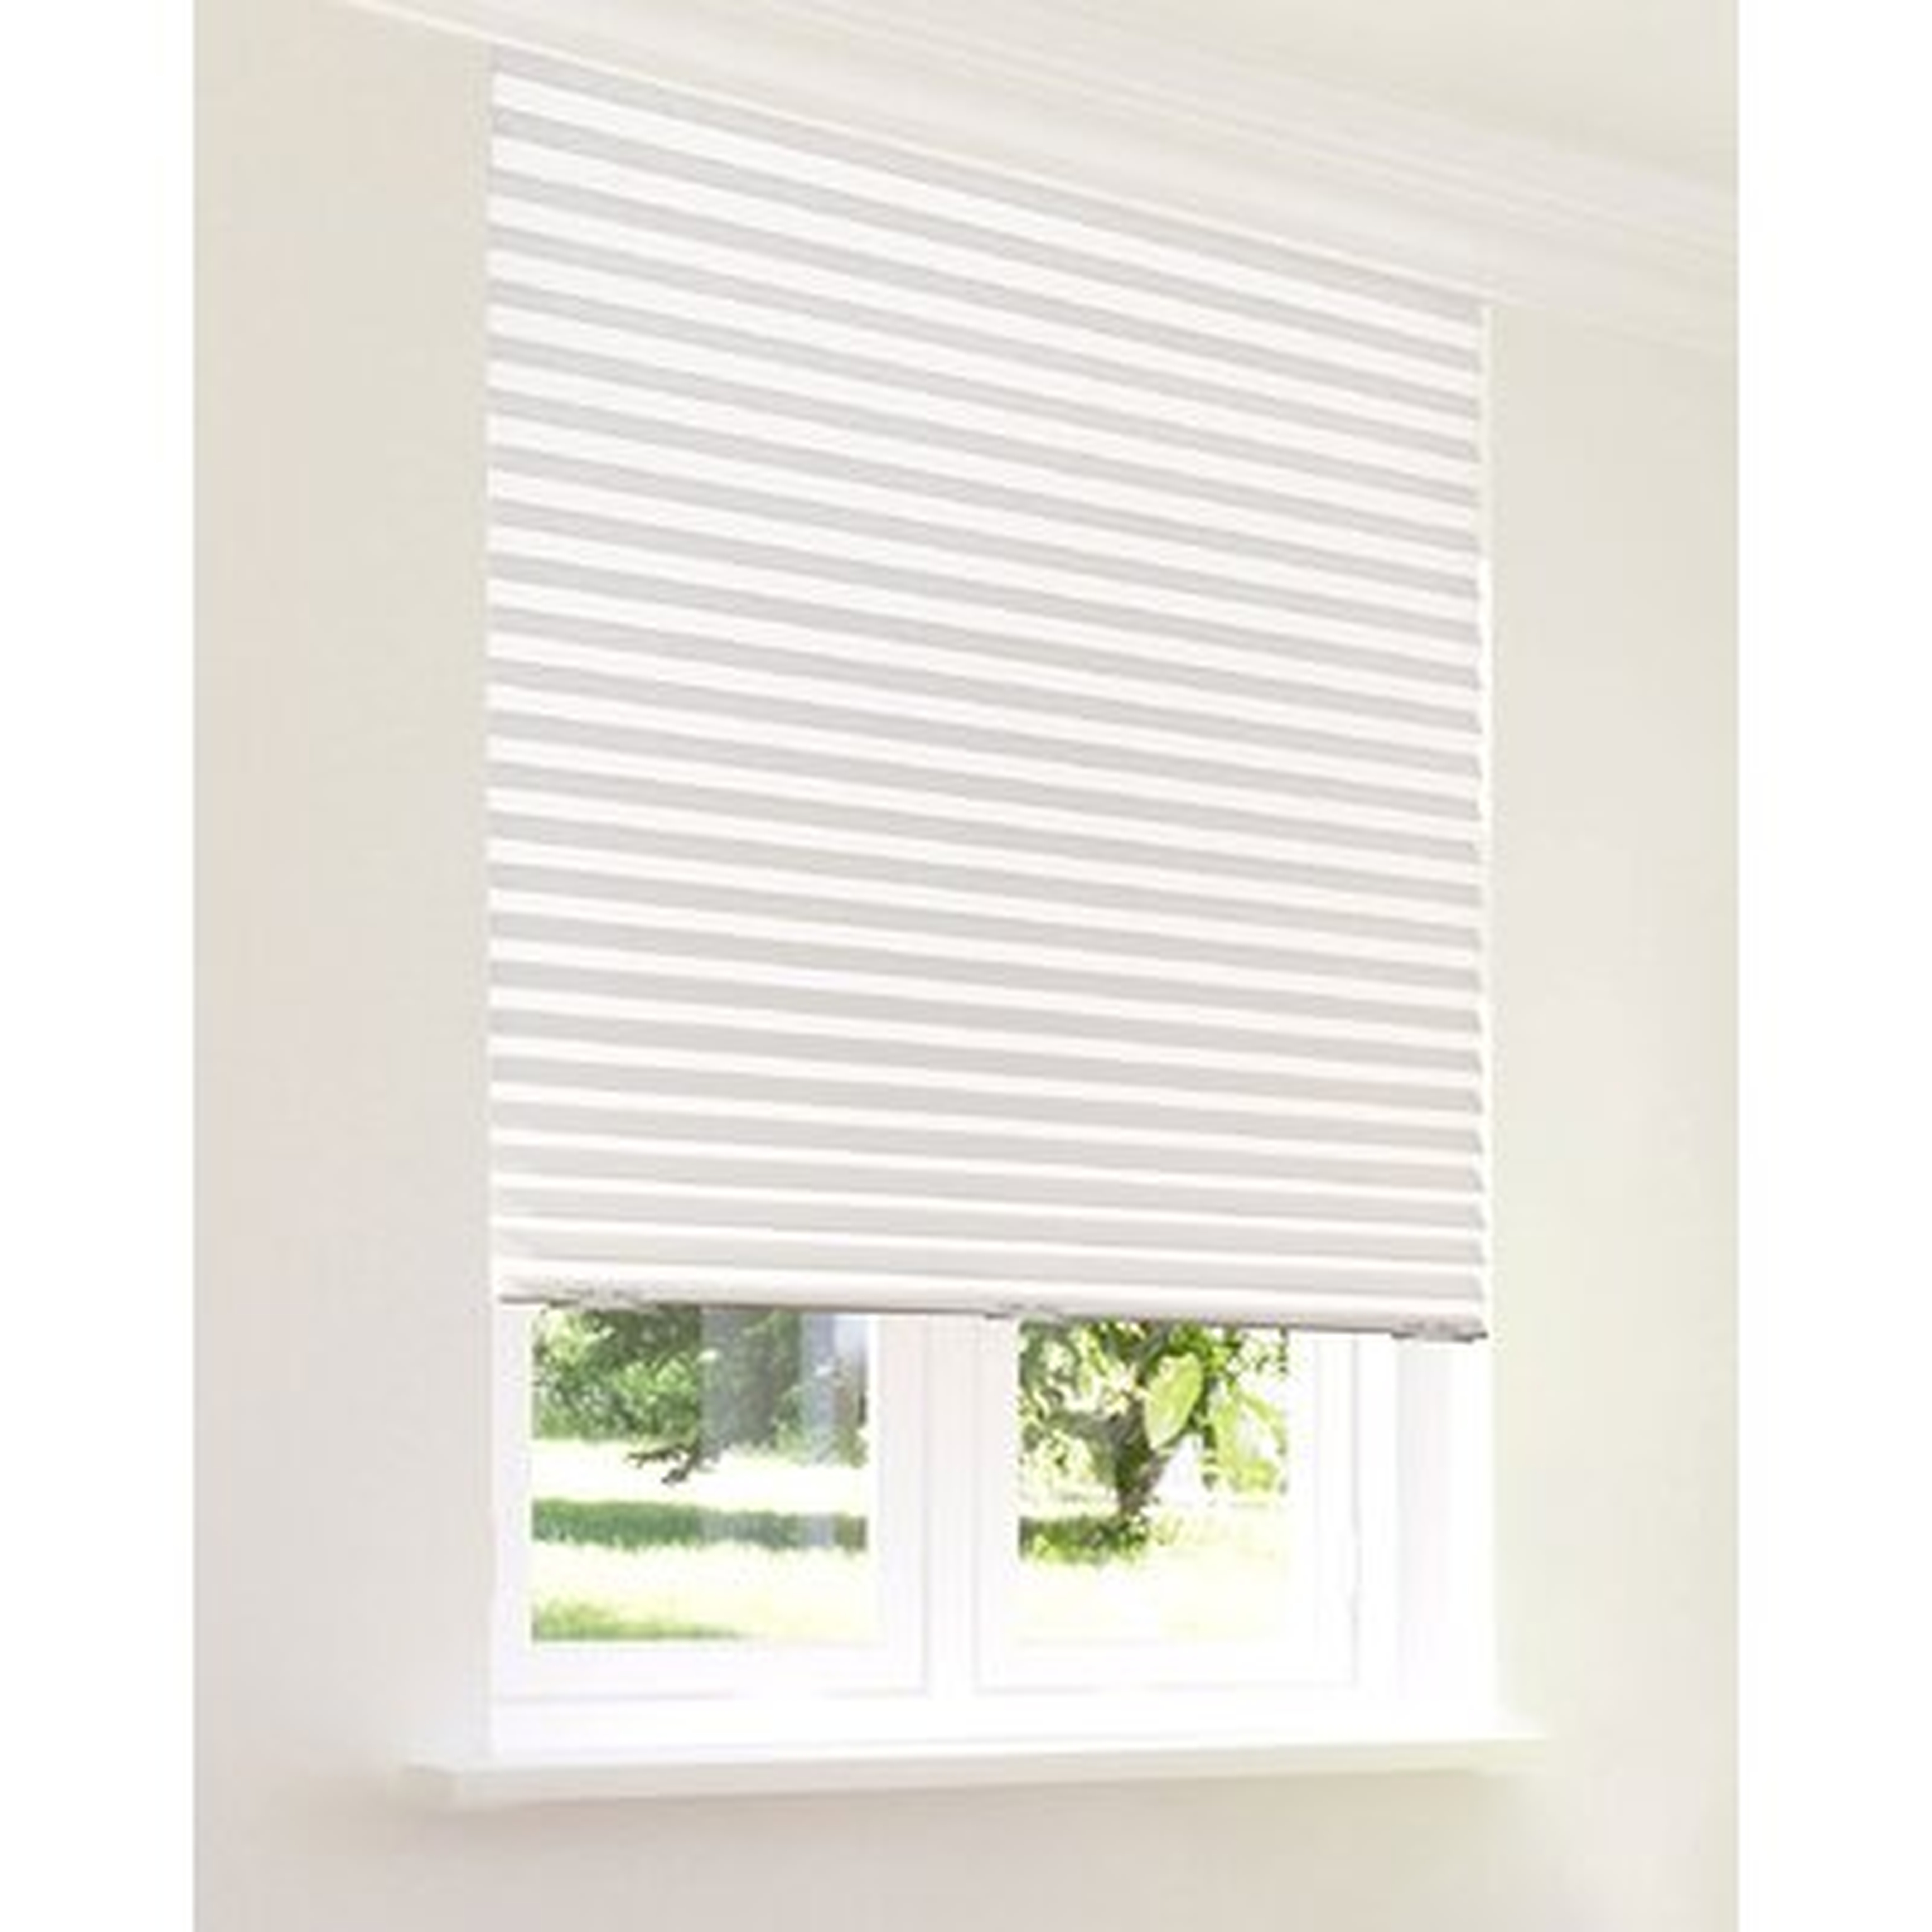 Window Shades For Home , Blinds & Shades , Blinds For Windows , Window Blinds , Window Treatments , Window Shade , Temporary Blinds - Wayfair